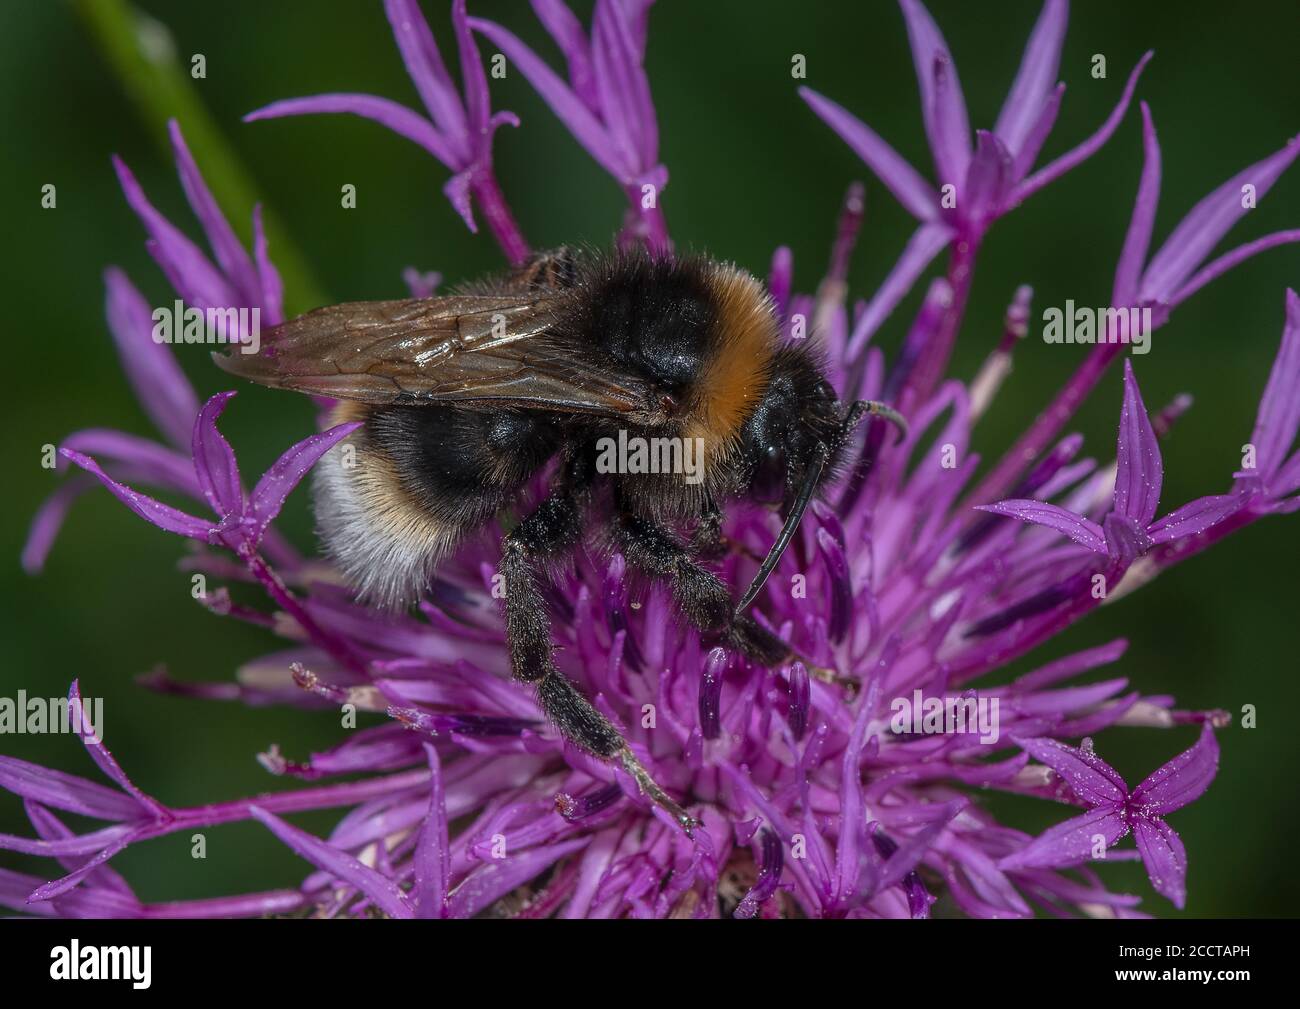 Forest cuckoo bumblebee, Bombus sylvestris, visiting Knapweed flower. Stock Photo